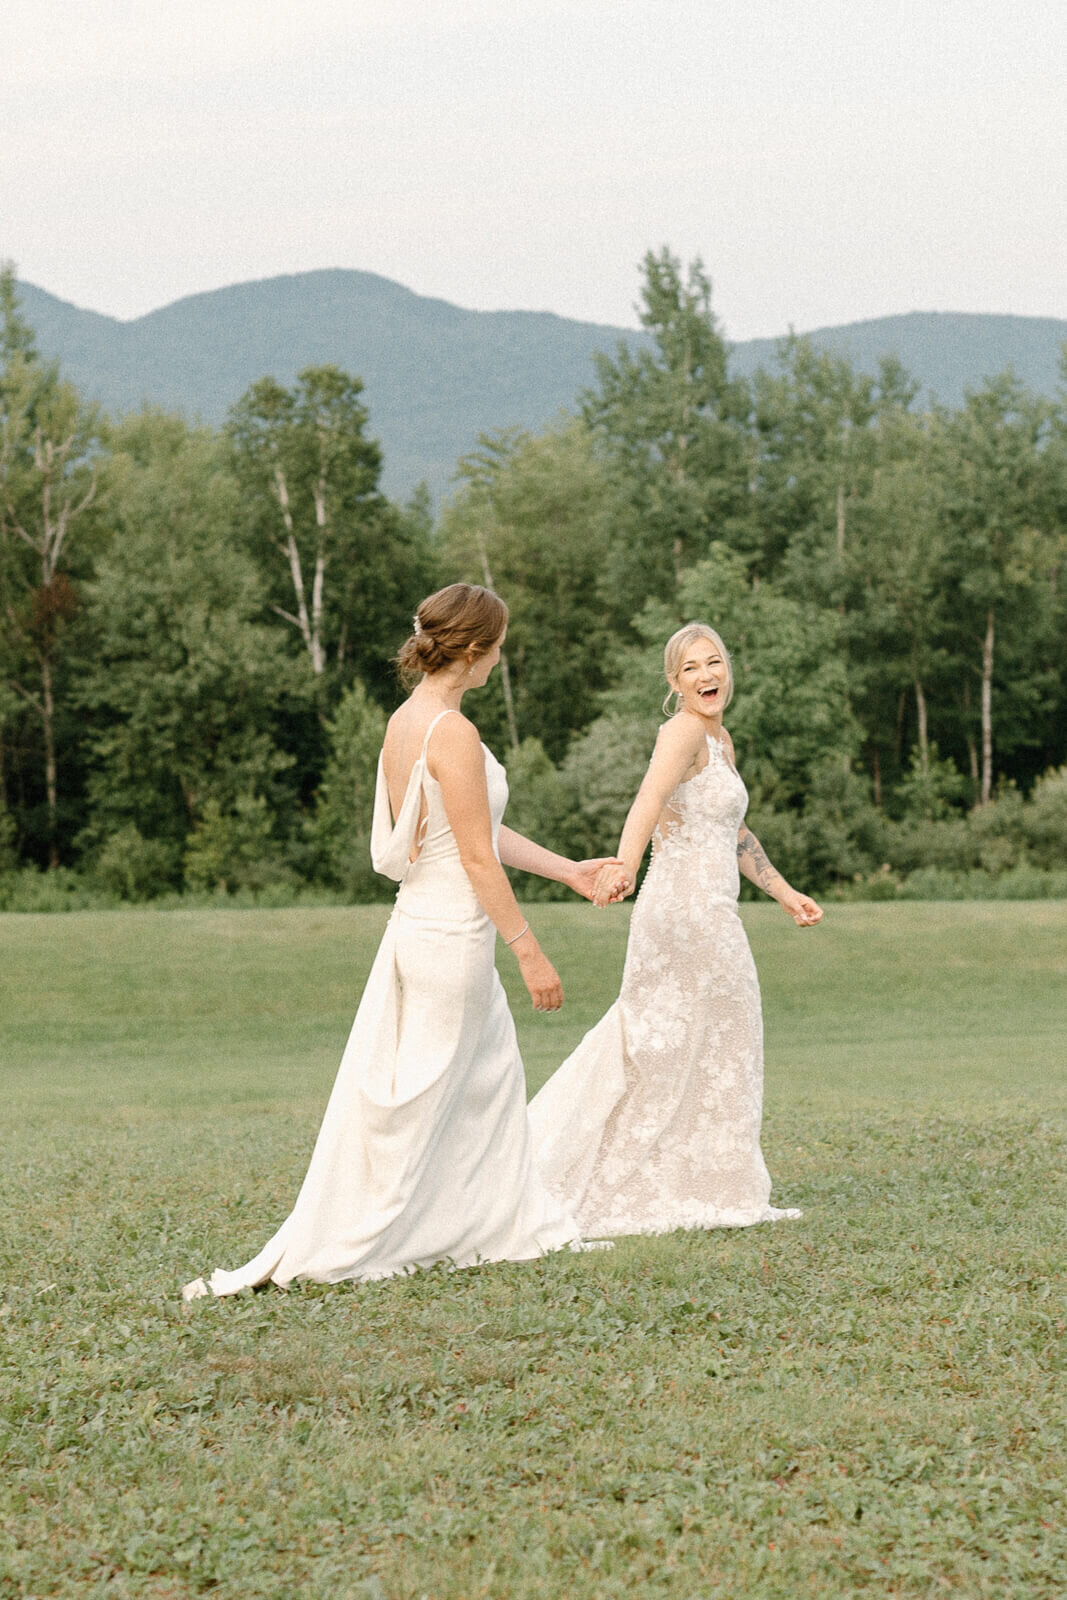 Brides holding hands and walking